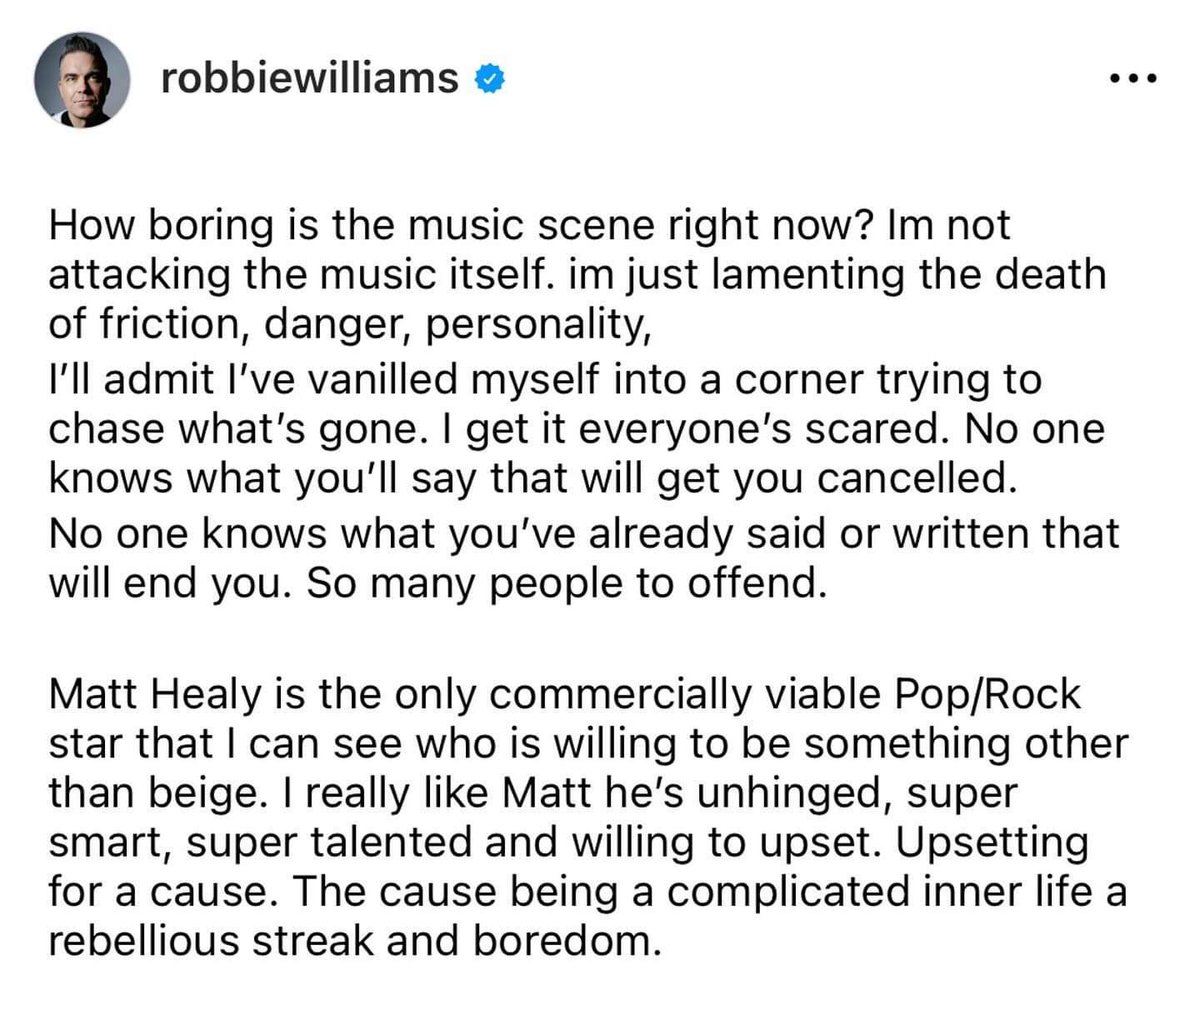 Although I've never personally been a fan of his, Robbie Williams is spot on here. Well said Robbie.

#CancelCancelCulture